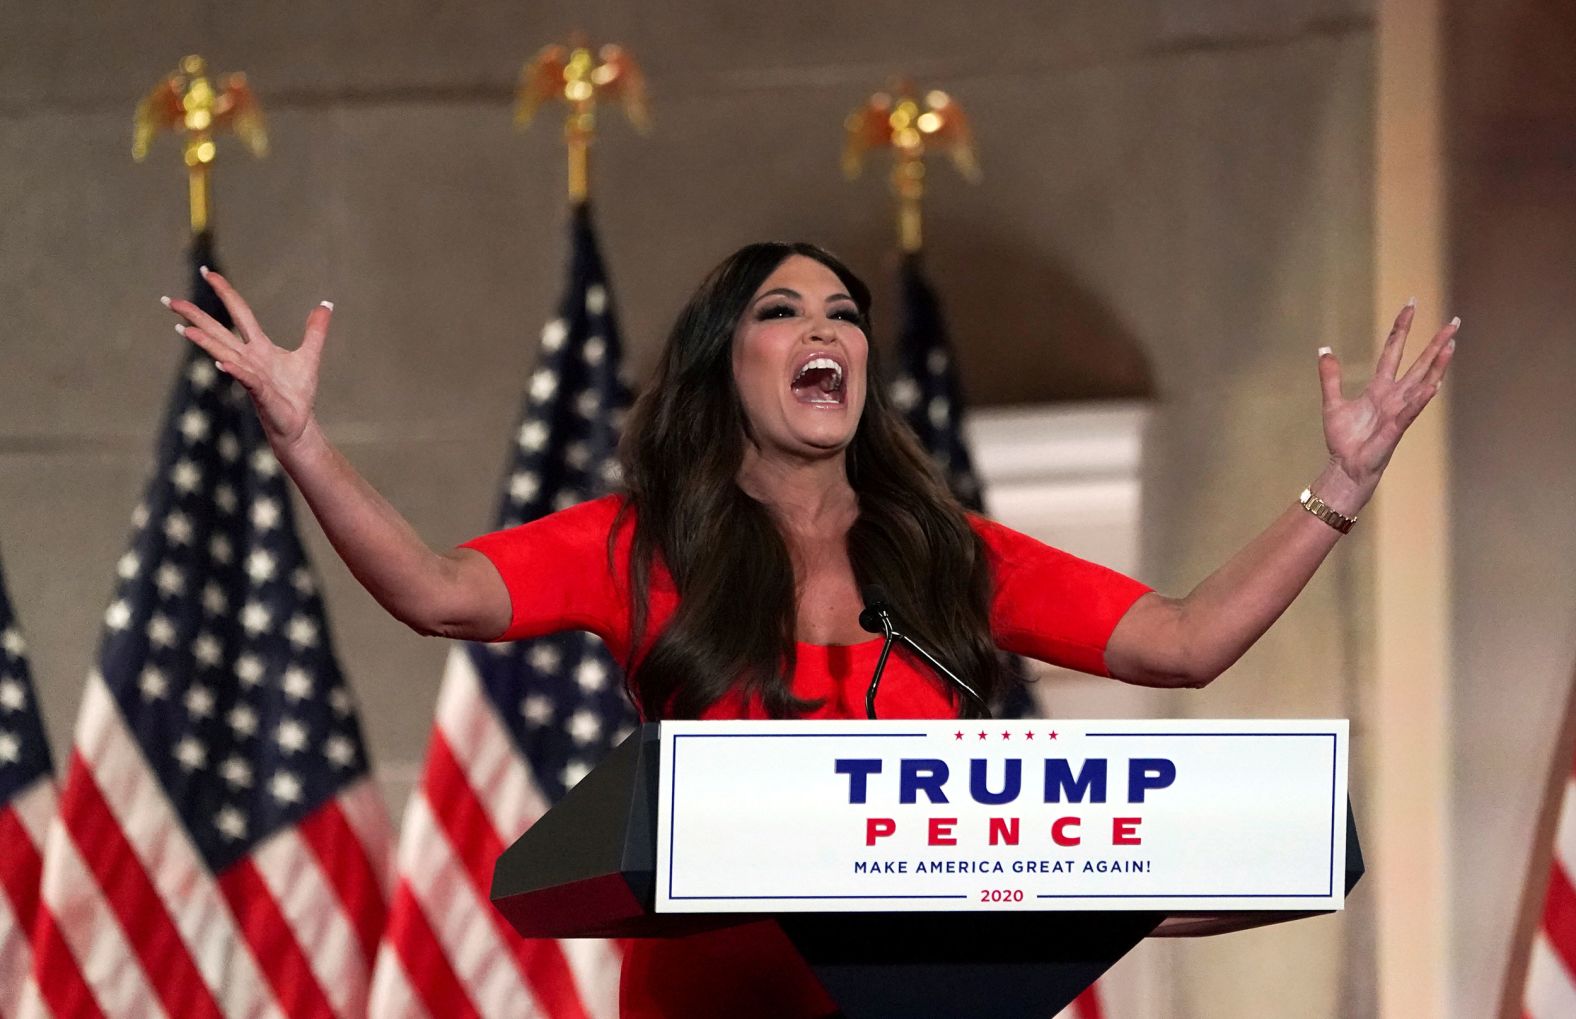 Kimberly Guilfoyle, a top fundraiser for the Trump campaign and the girlfriend of Donald Trump Jr., <a href="index.php?page=&url=https%3A%2F%2Fwww.cnn.com%2Fpolitics%2Flive-news%2Frnc-2020-day-1%2Fh_af09bfc7ec02eb6314c11644d3674e9f" target="_blank">delivers her speech.</a> She said the President "is the leader who will rebuild the promise of America and ensure that every citizen can realize their American dream."